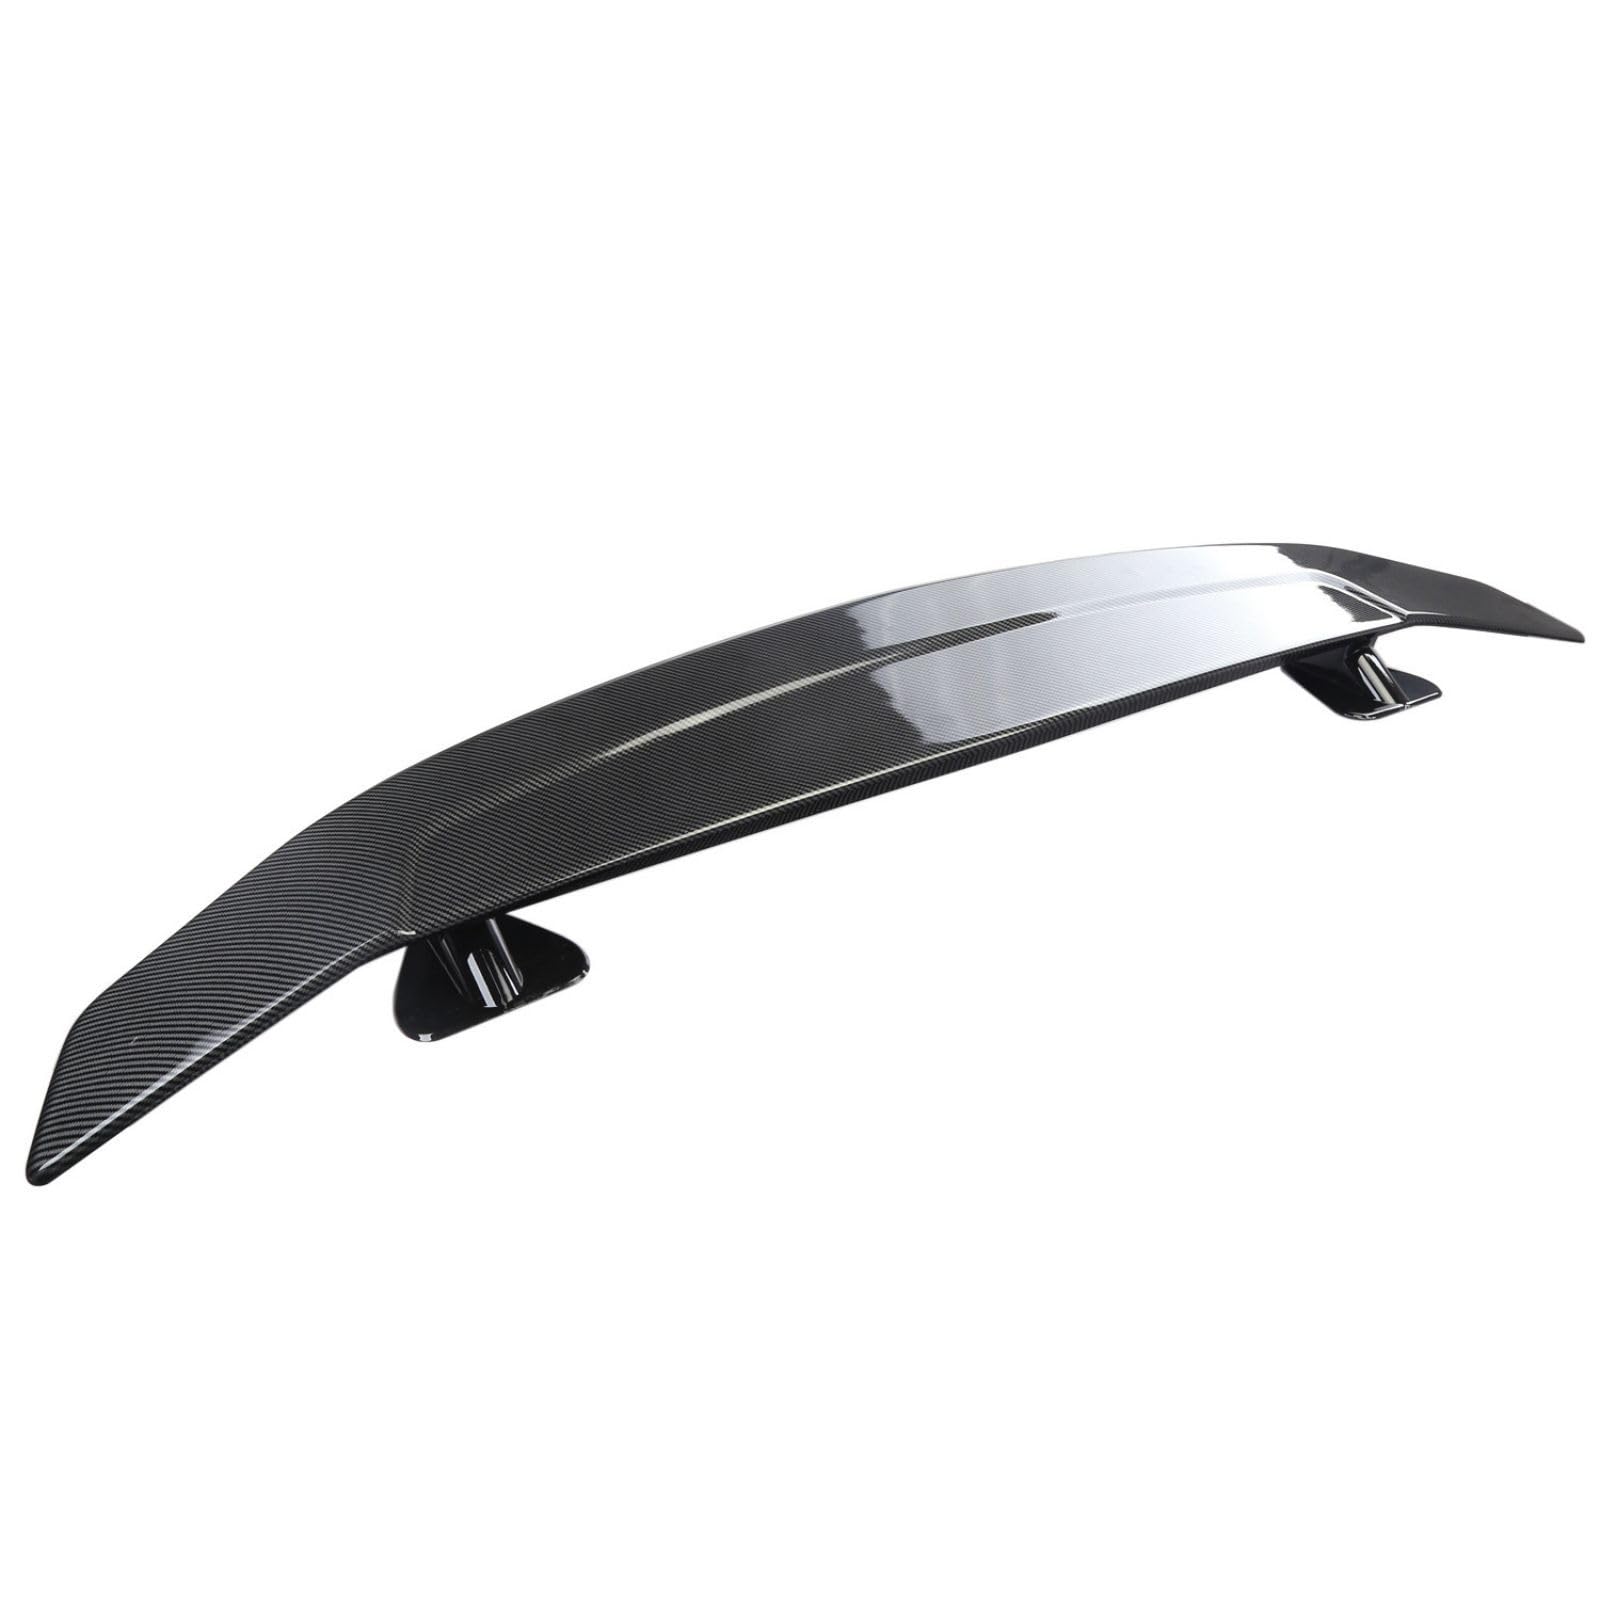 Car Rear Window Spoiler for Alpina B11 (E32) 1987-1994, without Perforation Lid Spoiler Wings Installation Rear Wing Decoration,Carbon Fiber Color von EESWCSZZ3